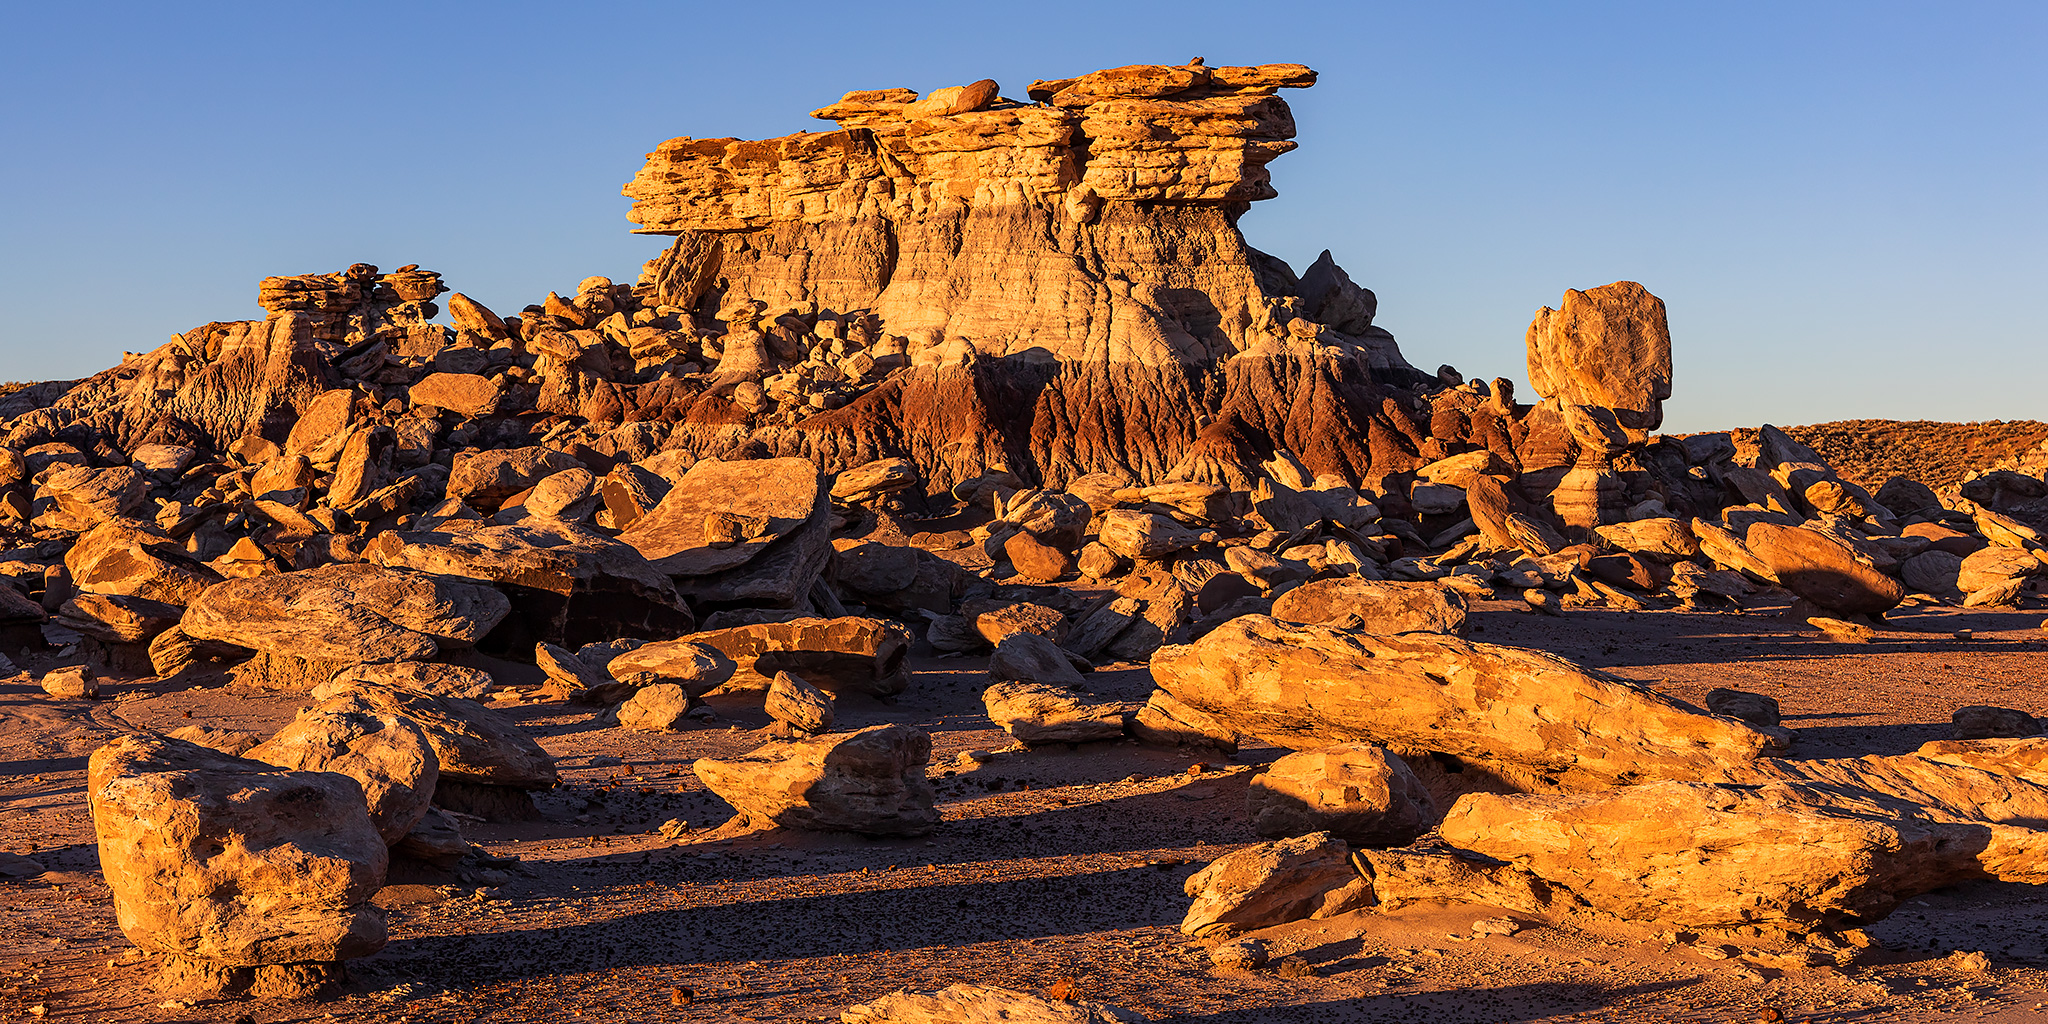 A Brief Stopover in Petrified Forest National Park